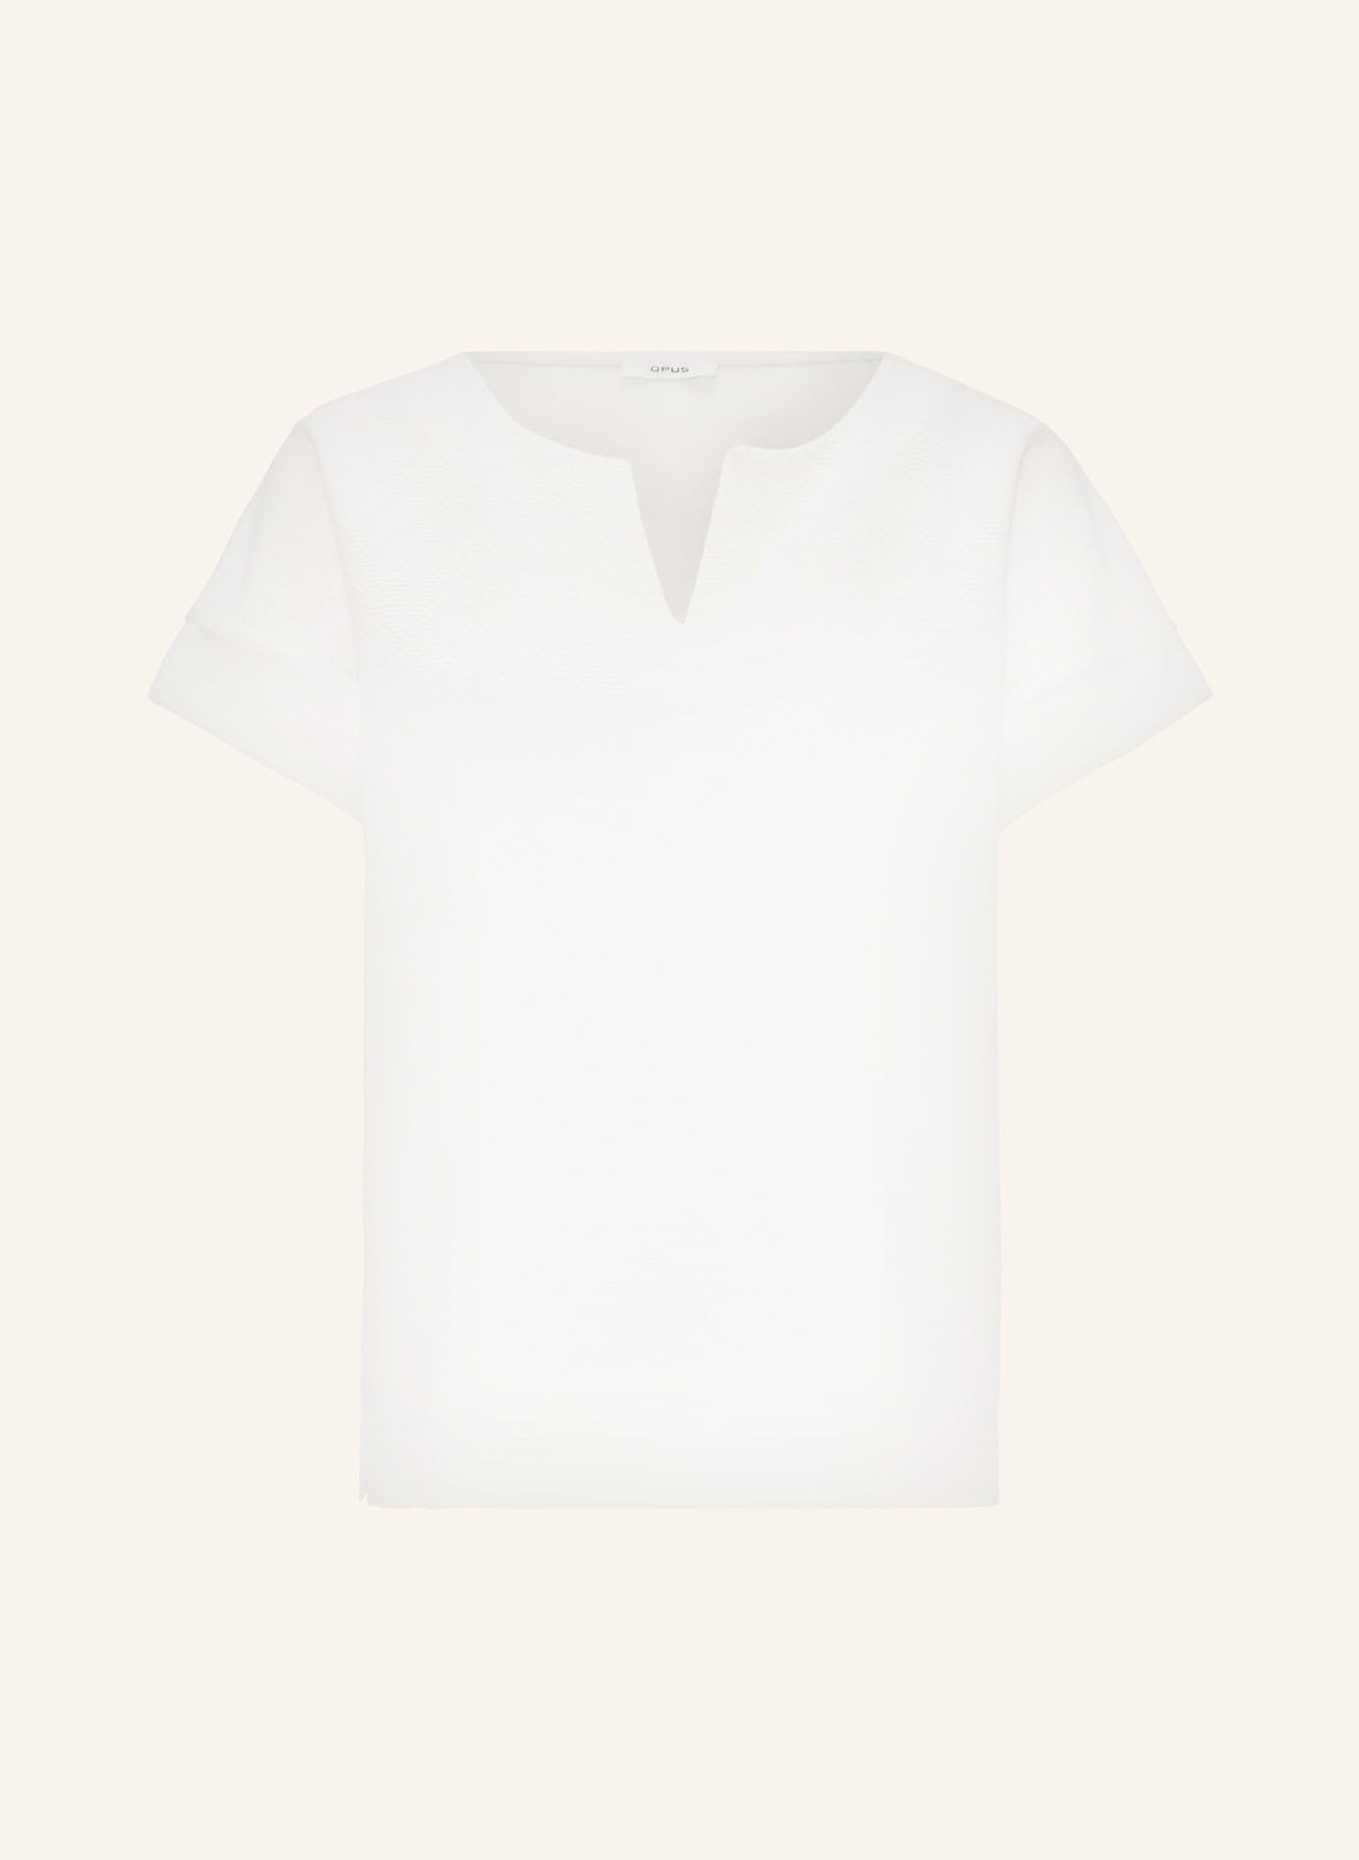 OPUS T-shirt GUVI, Color: WHITE (Image 1)